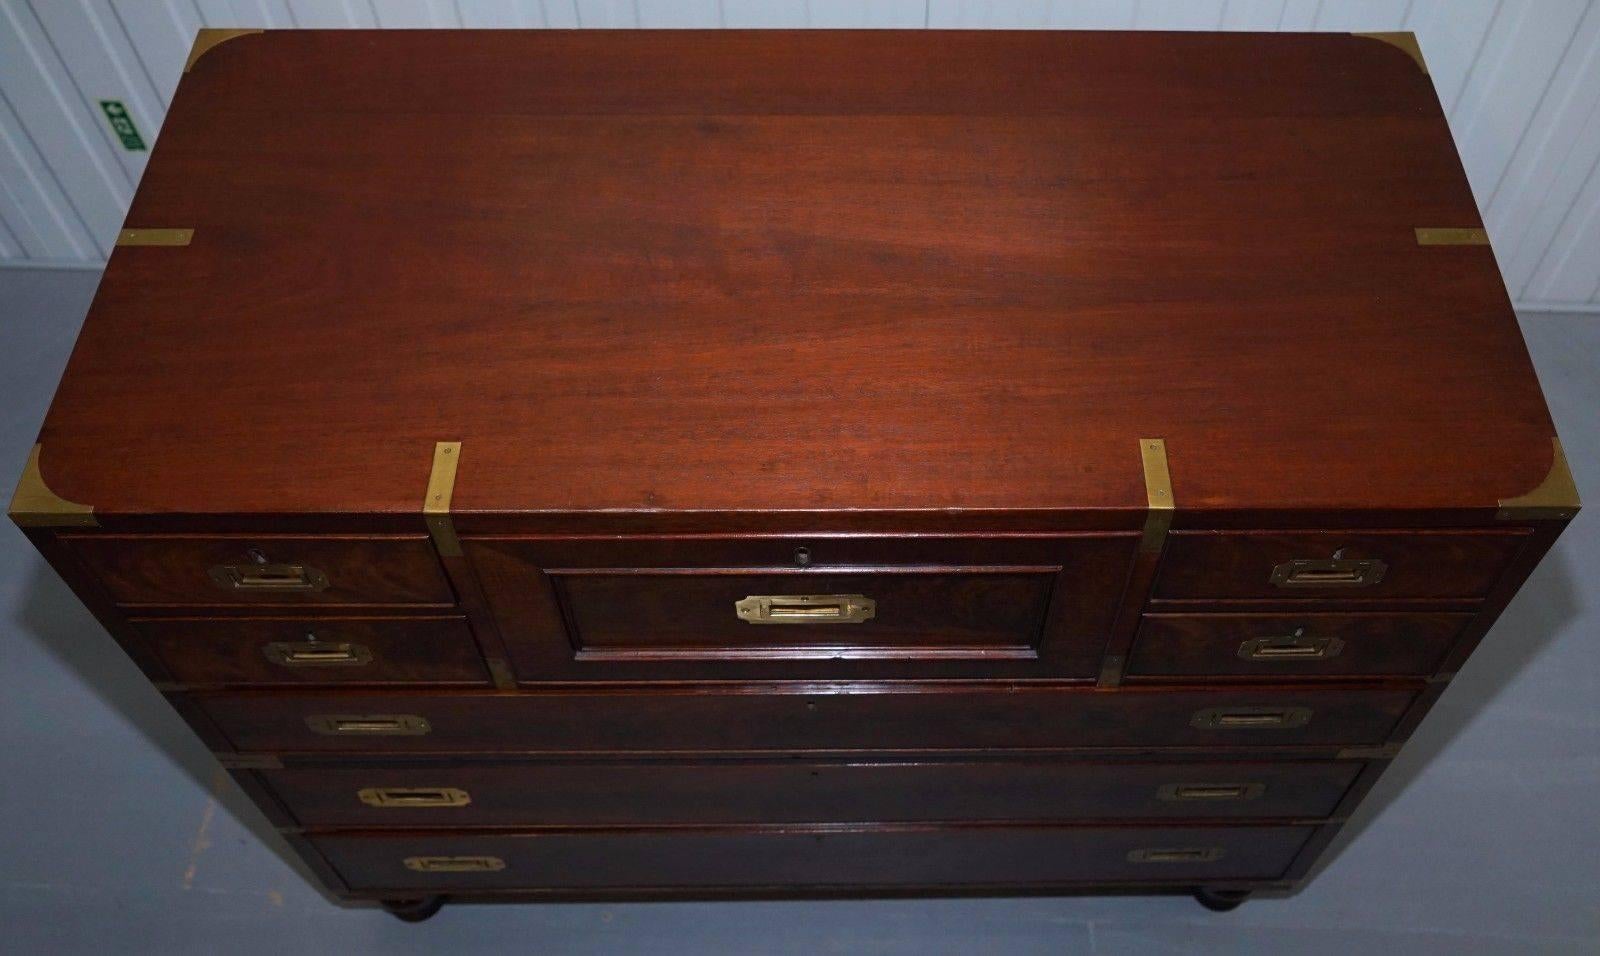 Late Victorian Rare Mahogany 1890 Military Campaign Chest of Drawers Drop Front Desk Secretaire